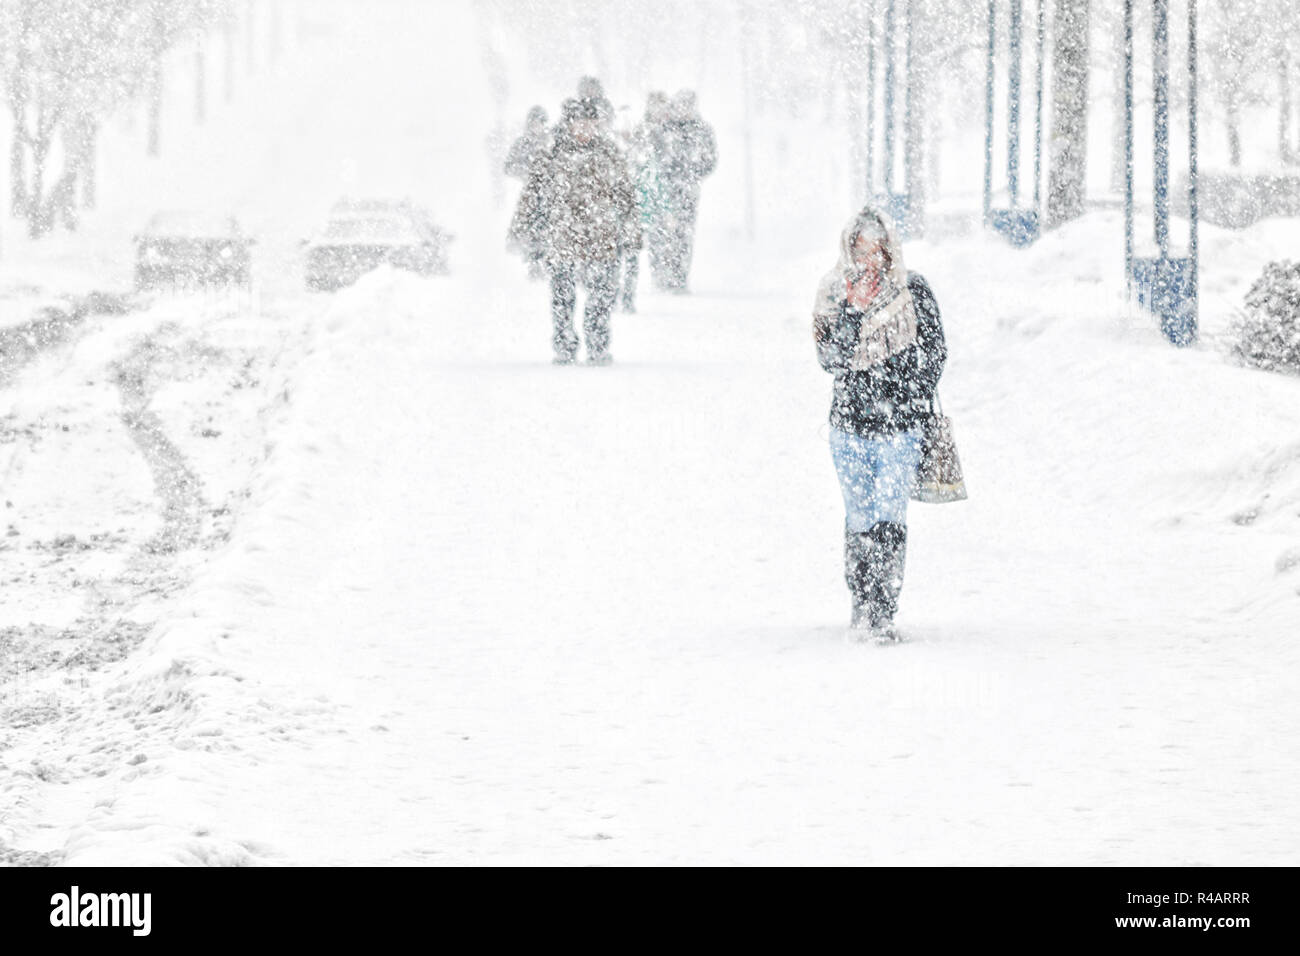 Young girl walk through snowfall resisting the pressure of a snowfall. Blizzard in an urban environment. Abstract blurry winter weather background Stock Photo